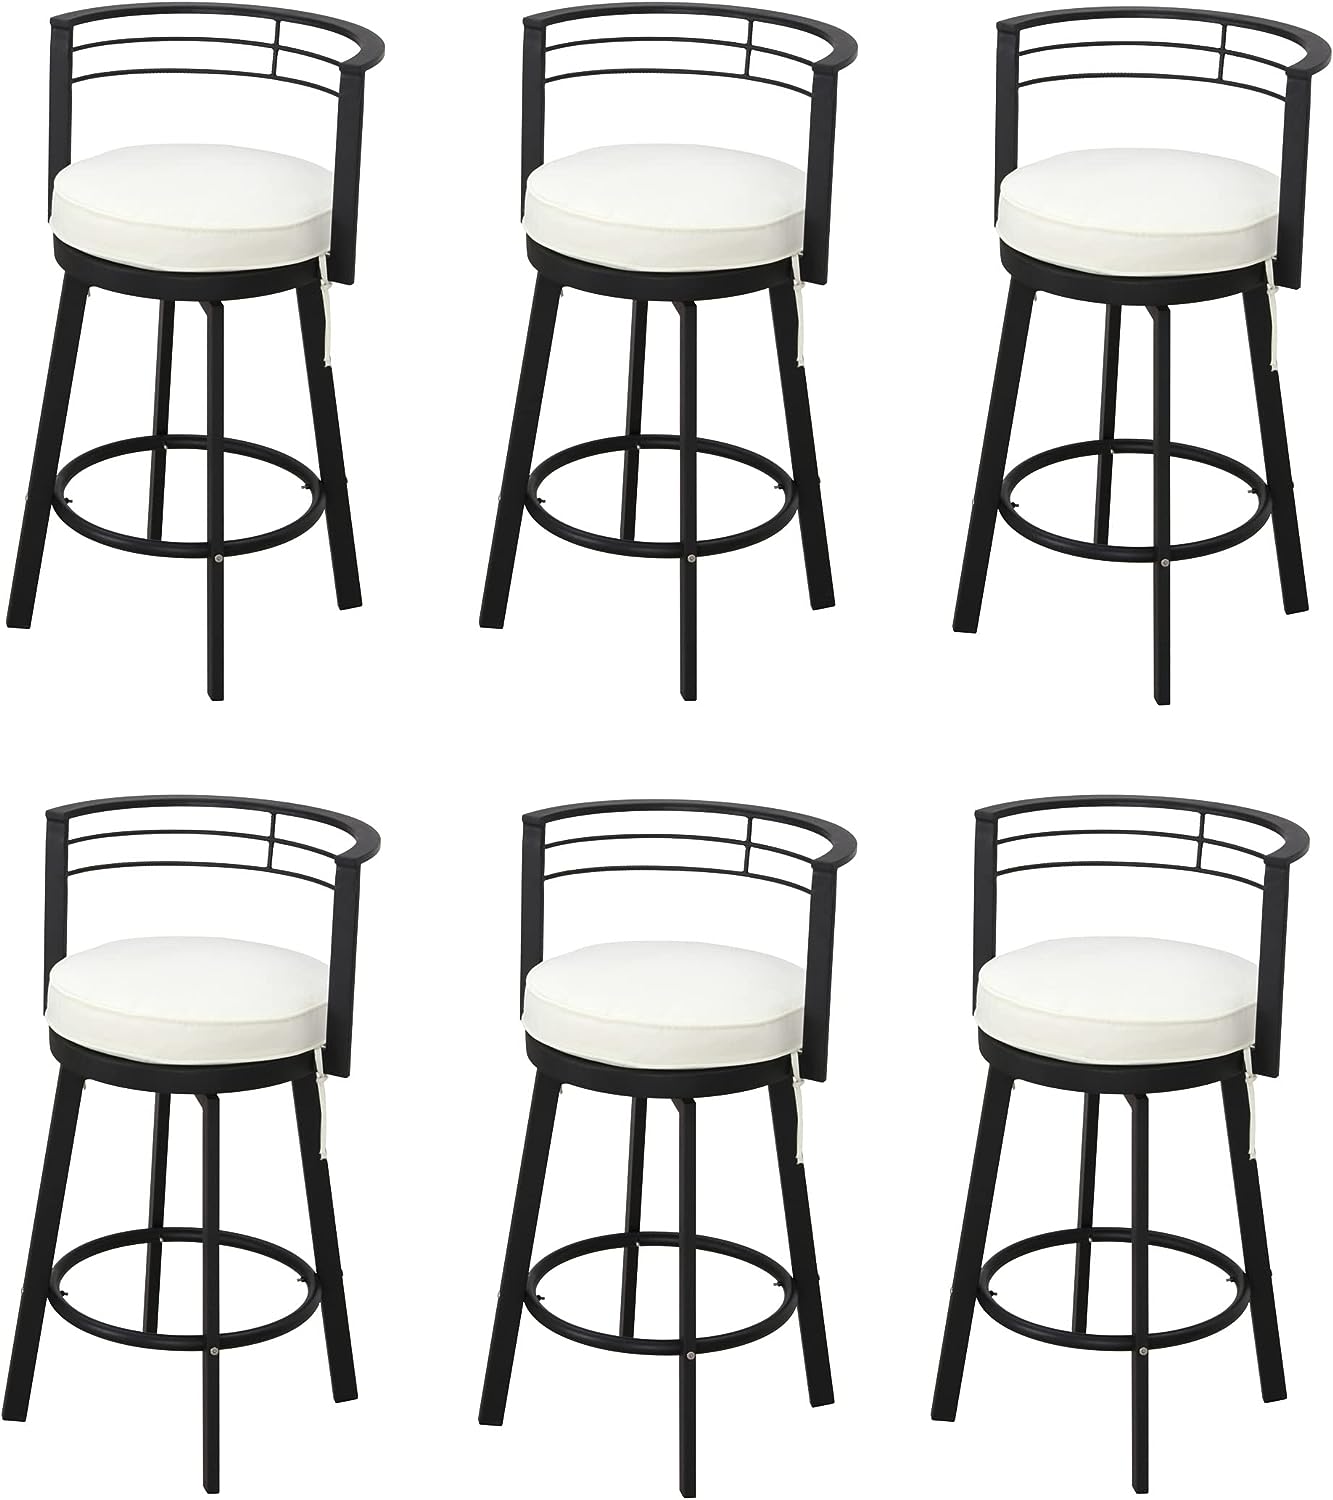 Festival Depot Patio Swivel Chair Bar Stools Outdoor Armchair with Black Metal Frame Removable Cushion for Bistro Bar Indoor Home Counter Garden Pool (Beige)